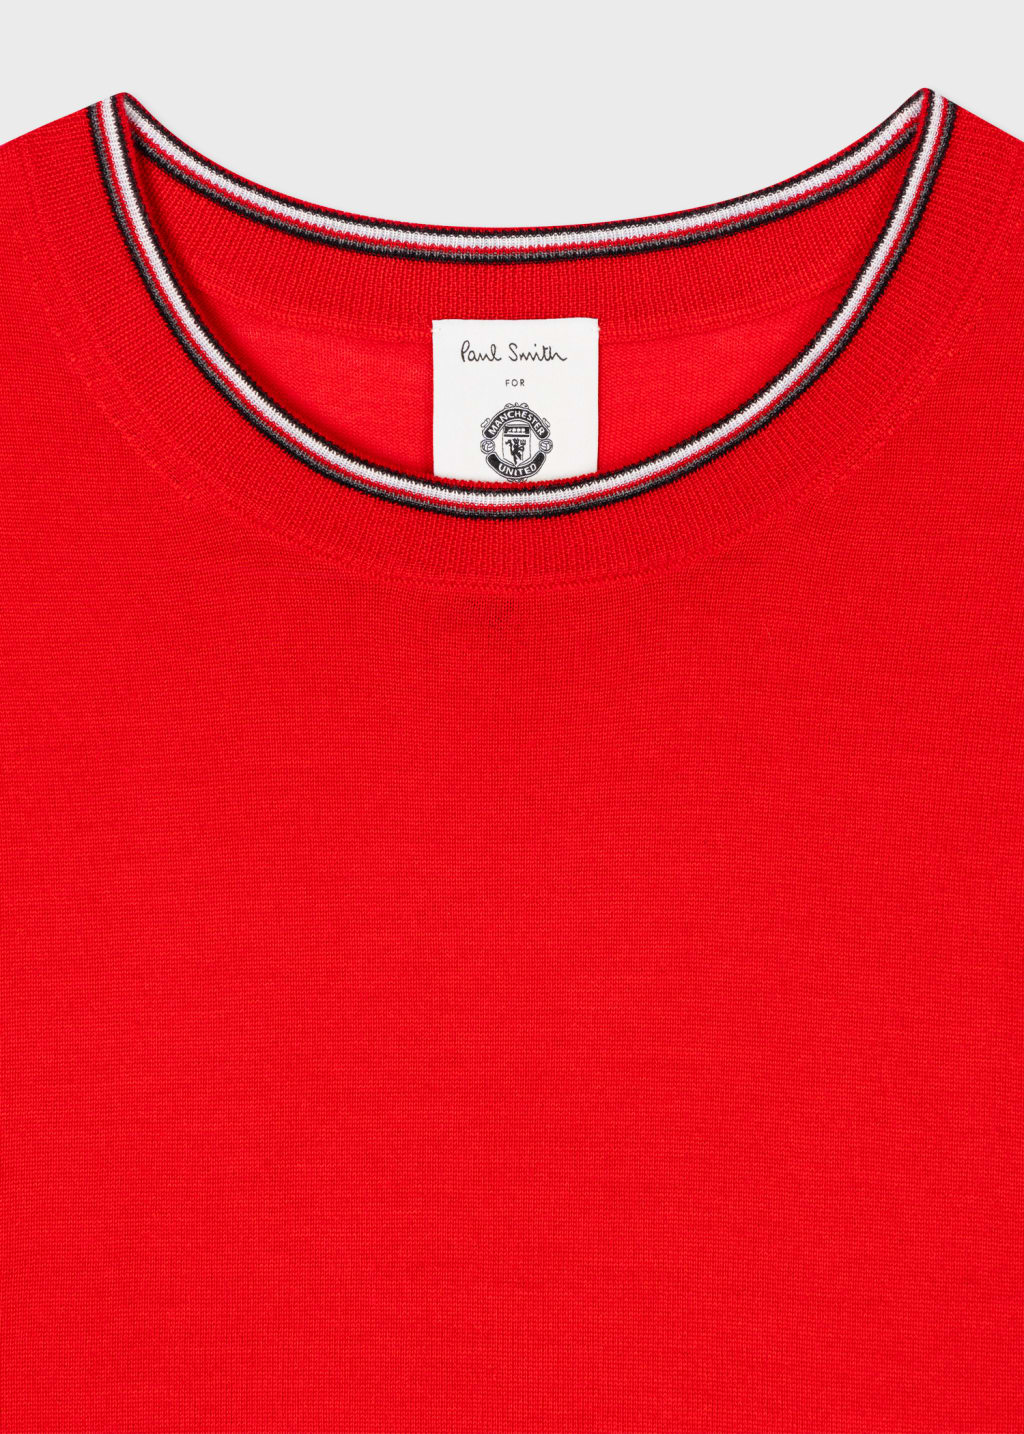 Detail View - Paul Smith & Manchester United - Red Merino Sweater Paul Smith